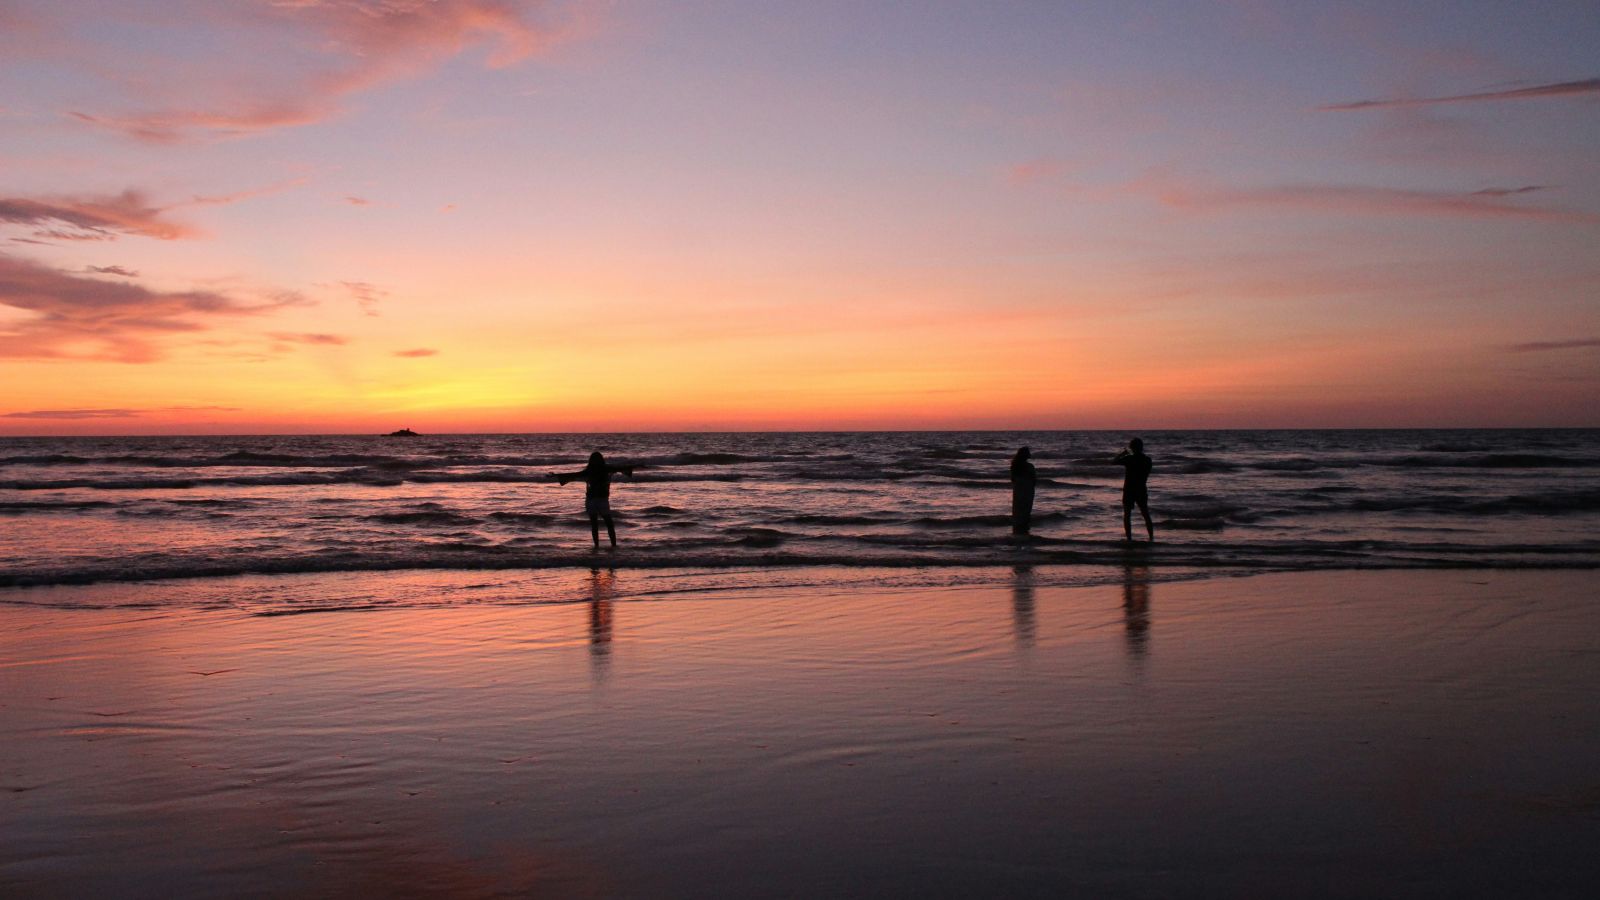 a group of people walking on the beach with the sky in different hues during a sunset